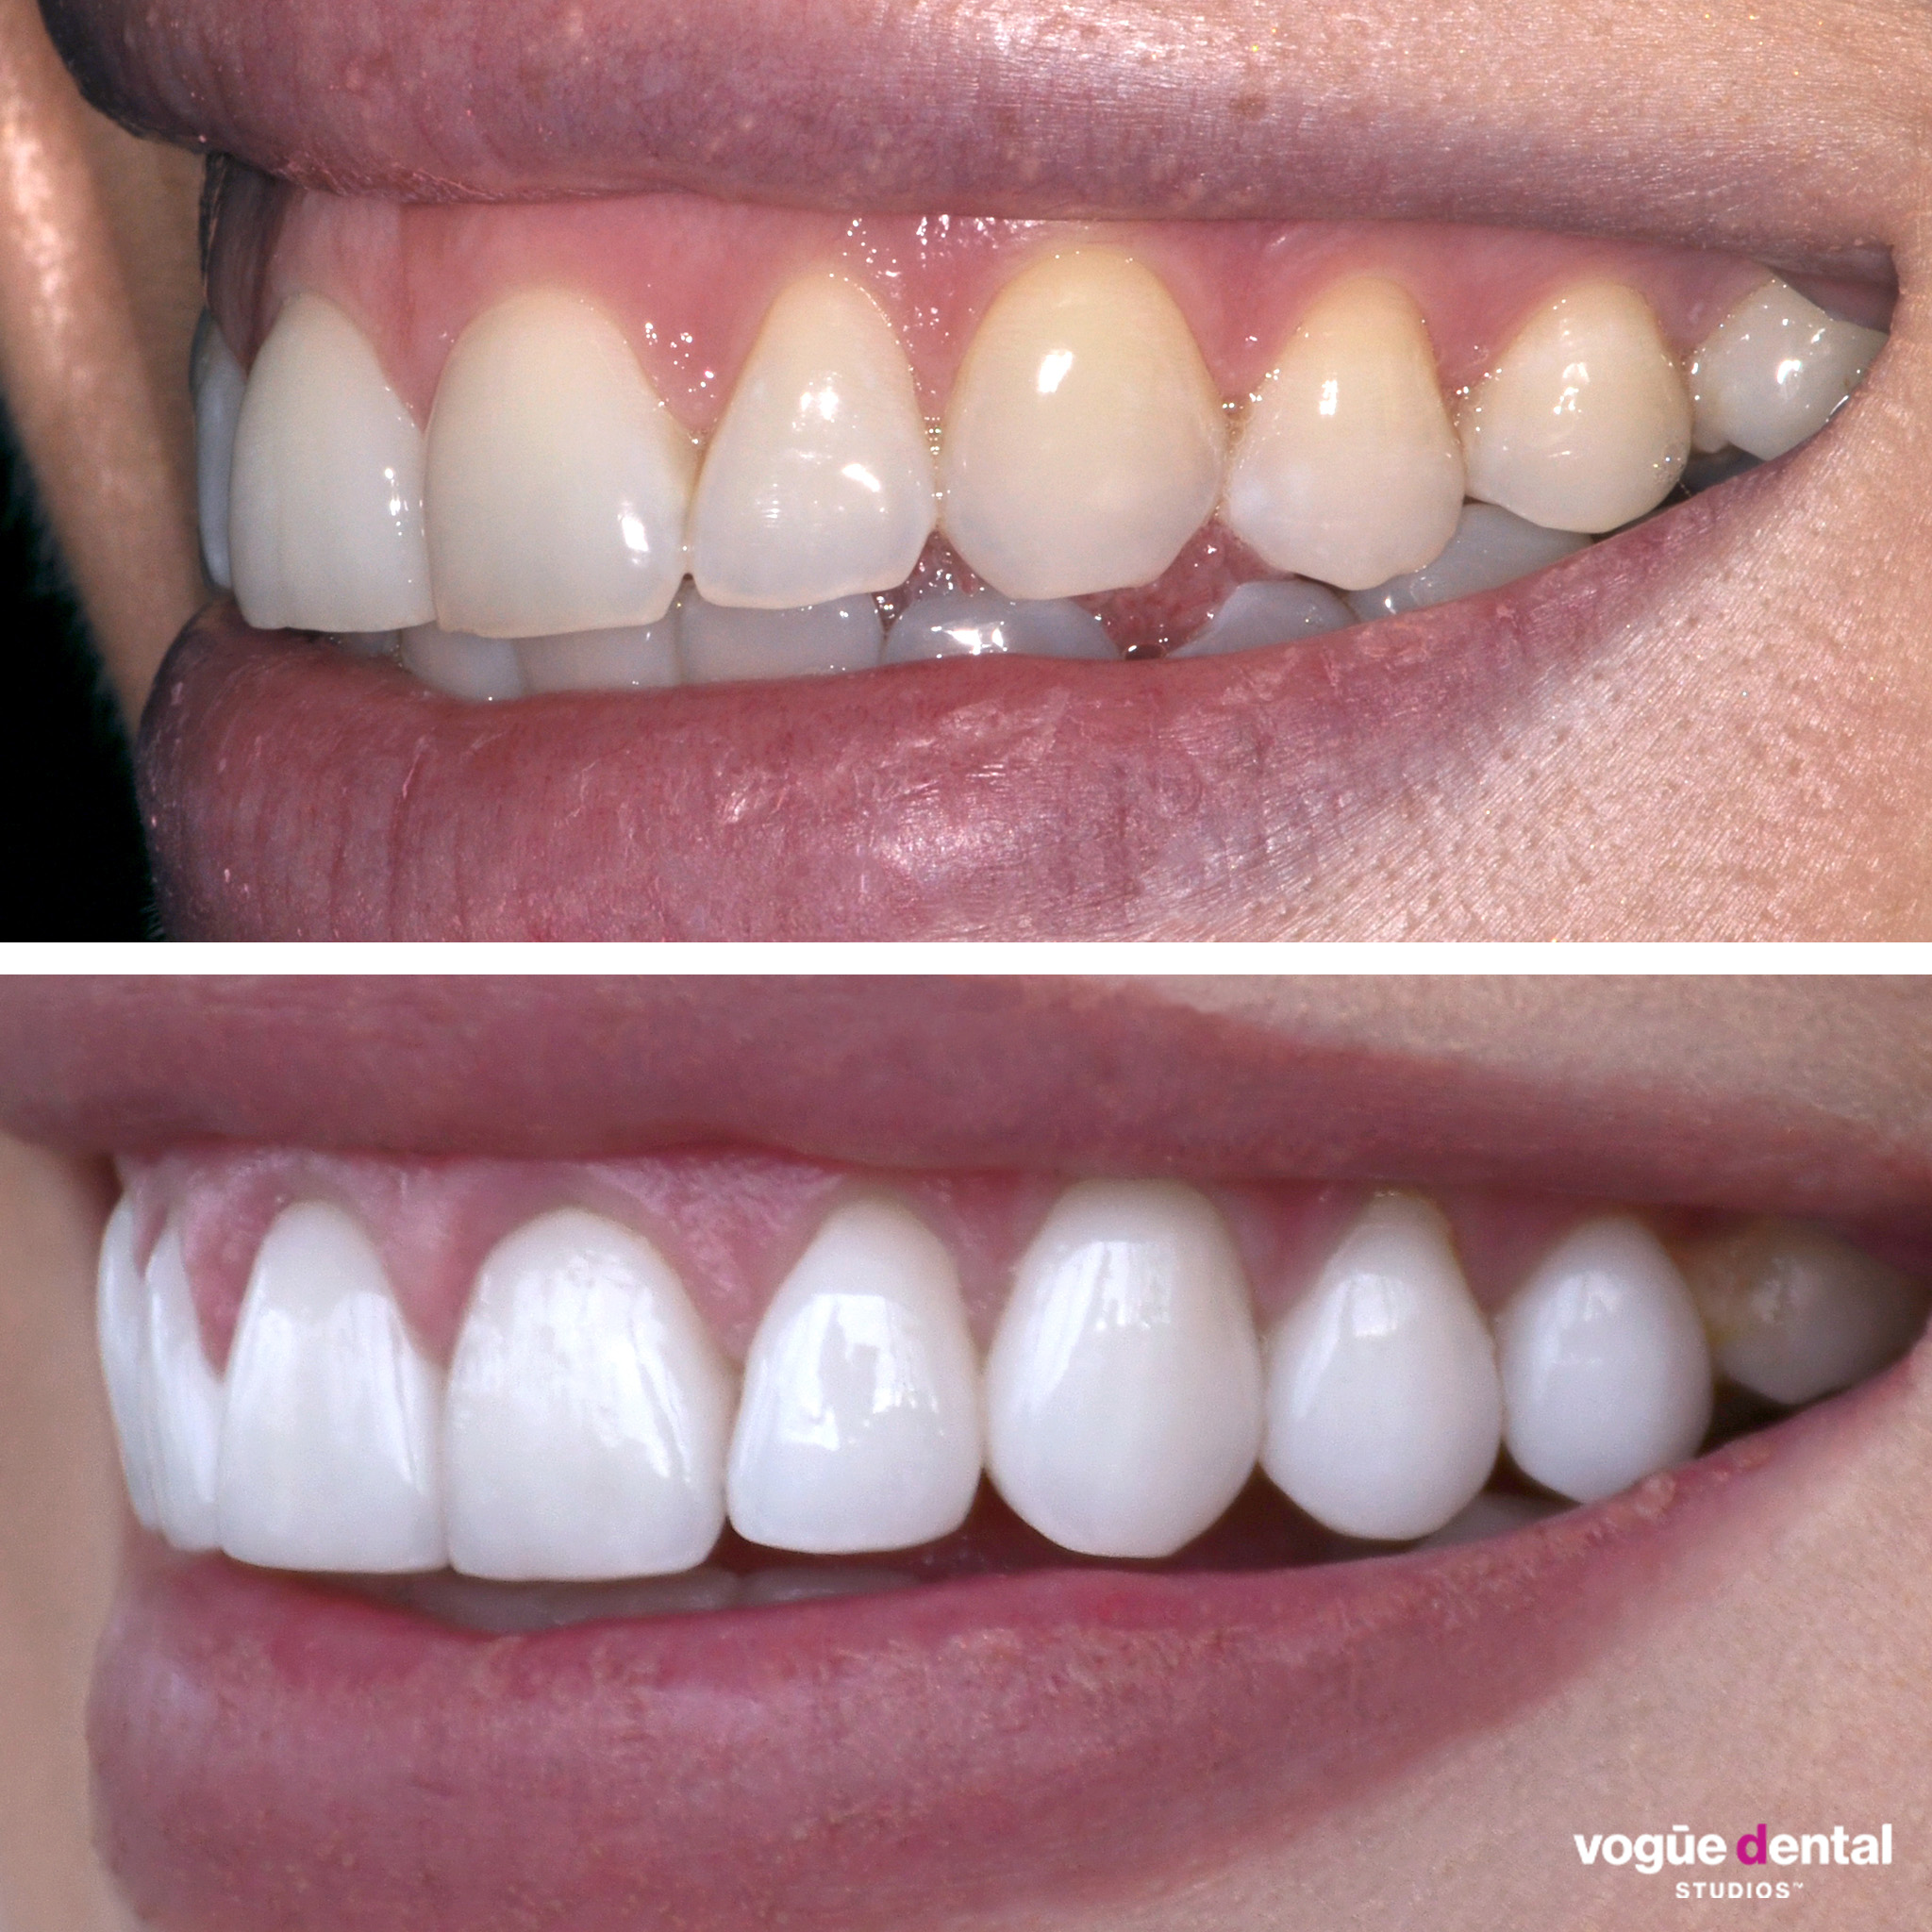 Before and after gummy smile and smile cant correction with porcelain veneers at Vogue Dental Studios - side view Cassie.